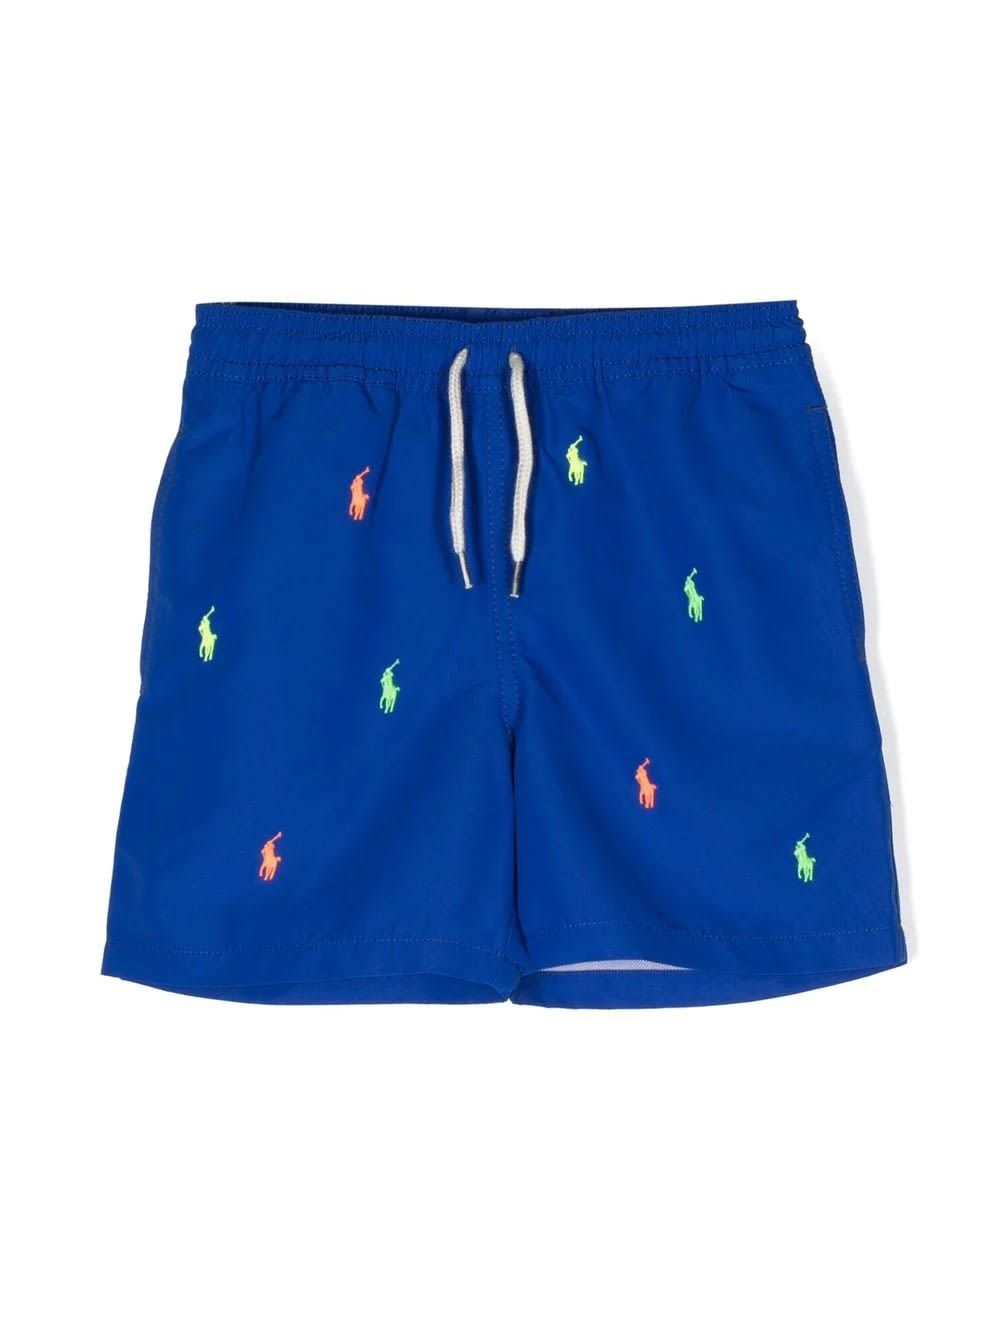 Polo Ralph Lauren Kids' Blue Swim Shorts With All-over Pony